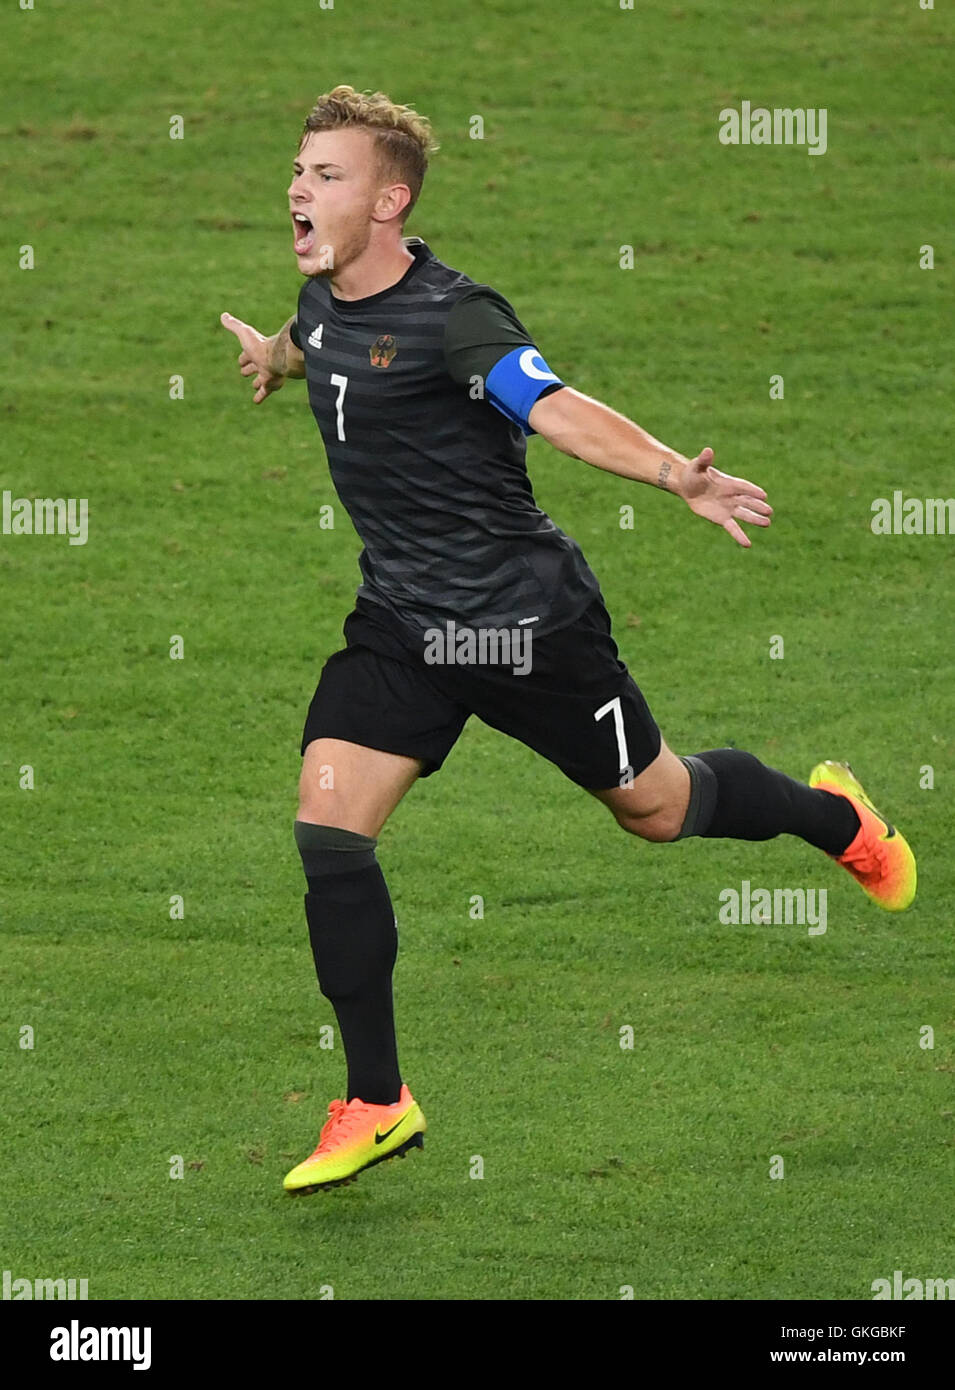 Rio de Janeiro, Brazil. 20th Aug, 2016. Maximilian Meyer of Germany celebrates after he scored the 1:1 during the Men's soccer Gold Medal Match between Brazil and Germany during the Rio 2016 Olympic Games at the Maracana in Rio de Janeiro, Brazil, 20 August 2016. Photo: Sebastian Kahnert/dpa/Alamy Live News Stock Photo